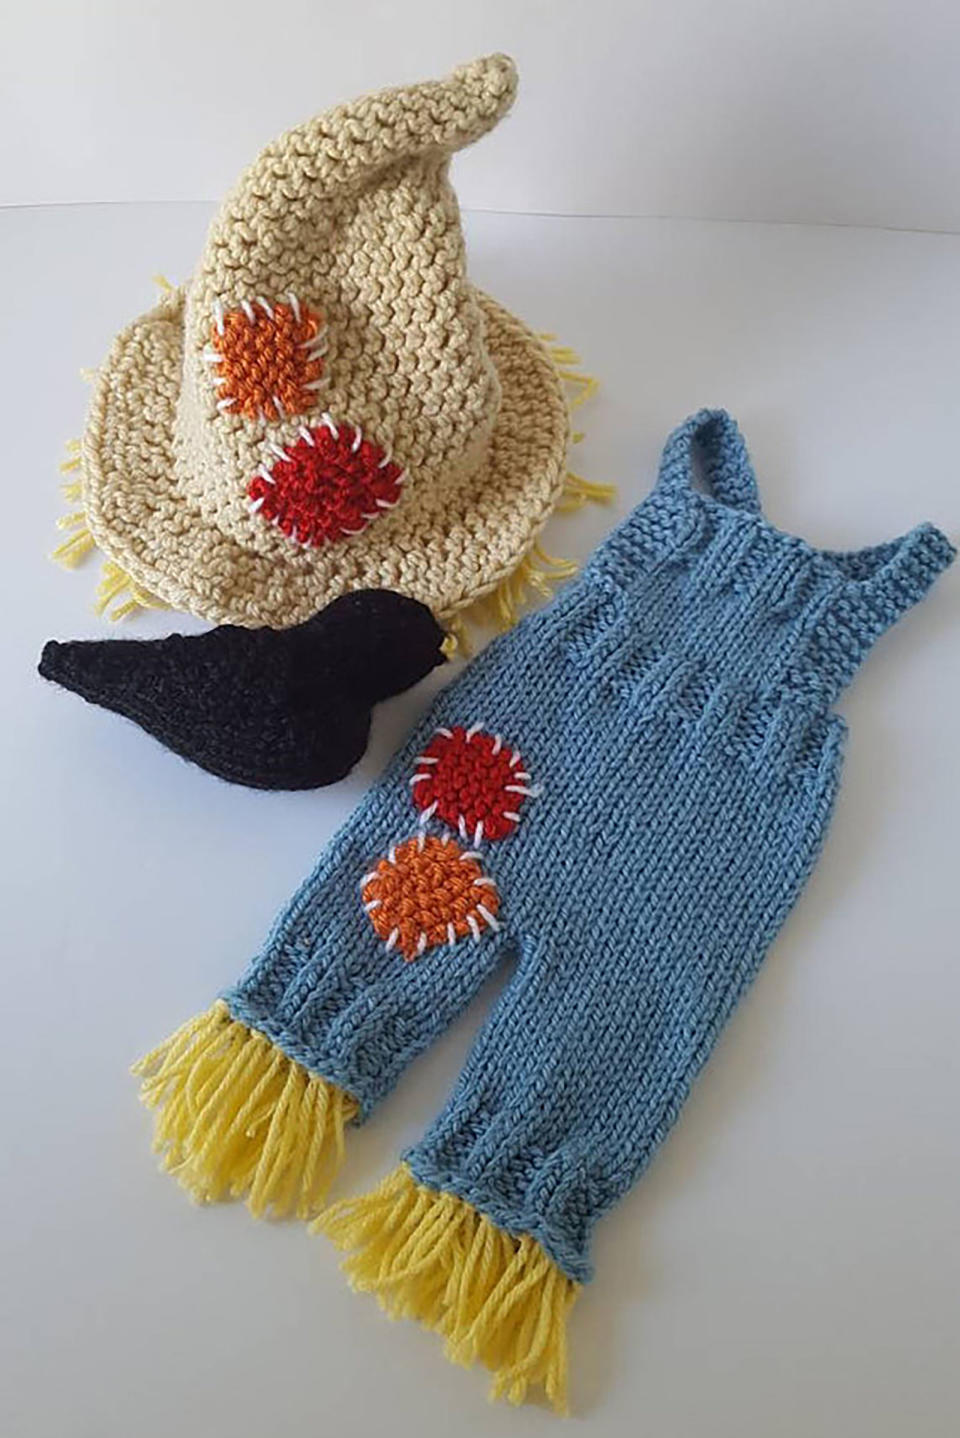 Knitted Scarecrow Halloween Costume for Baby